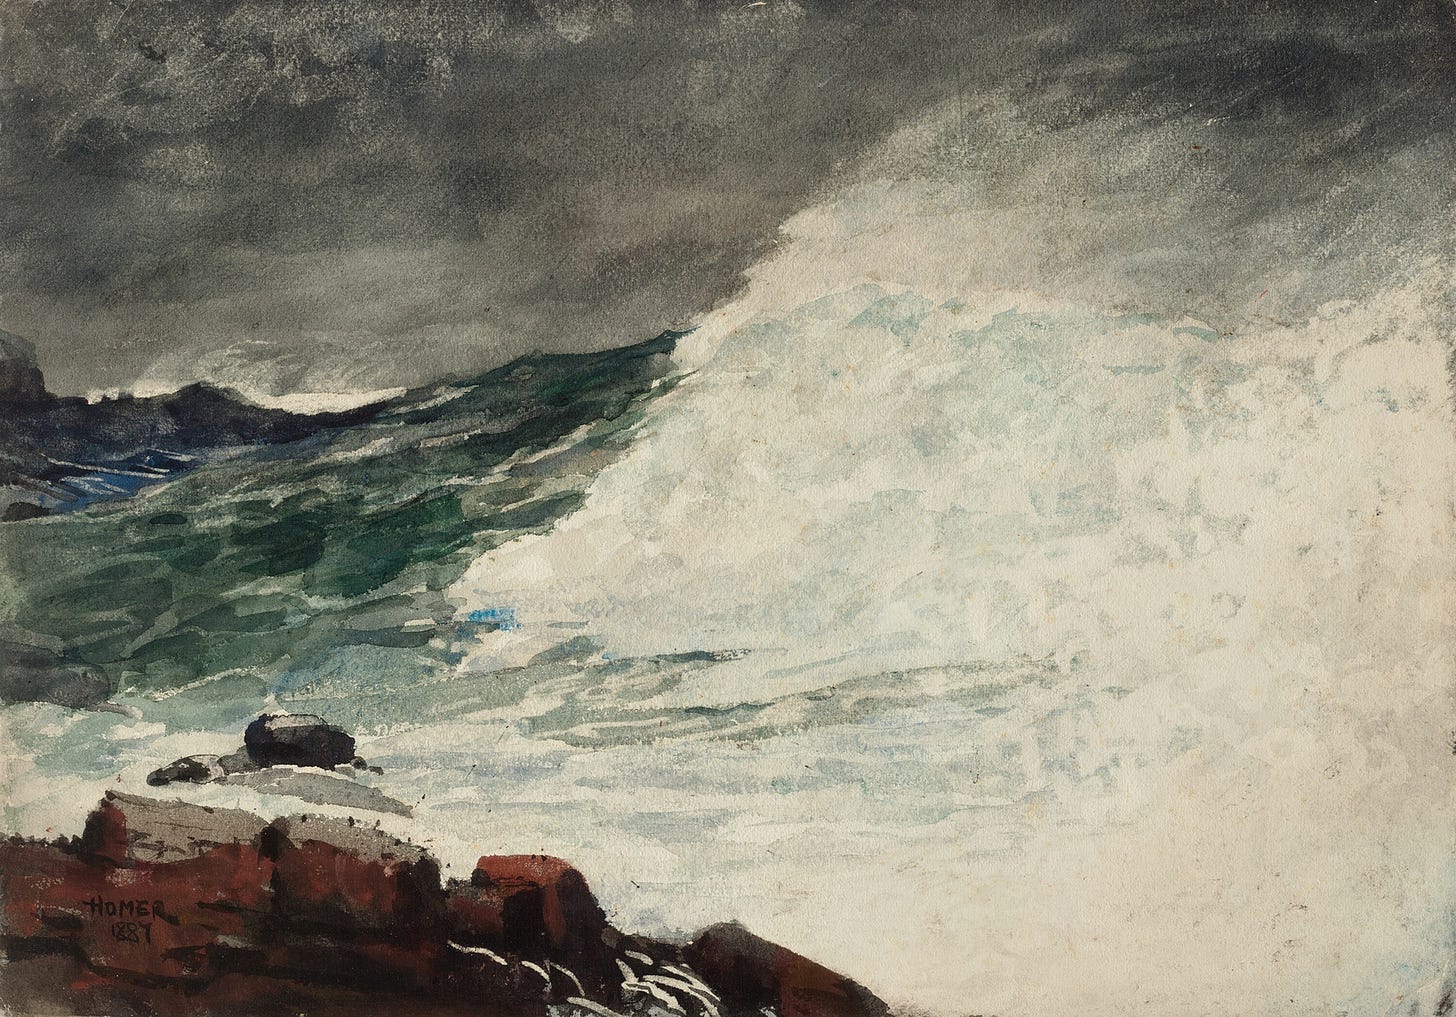 Prout’s Neck, Breaking Wave (1887)